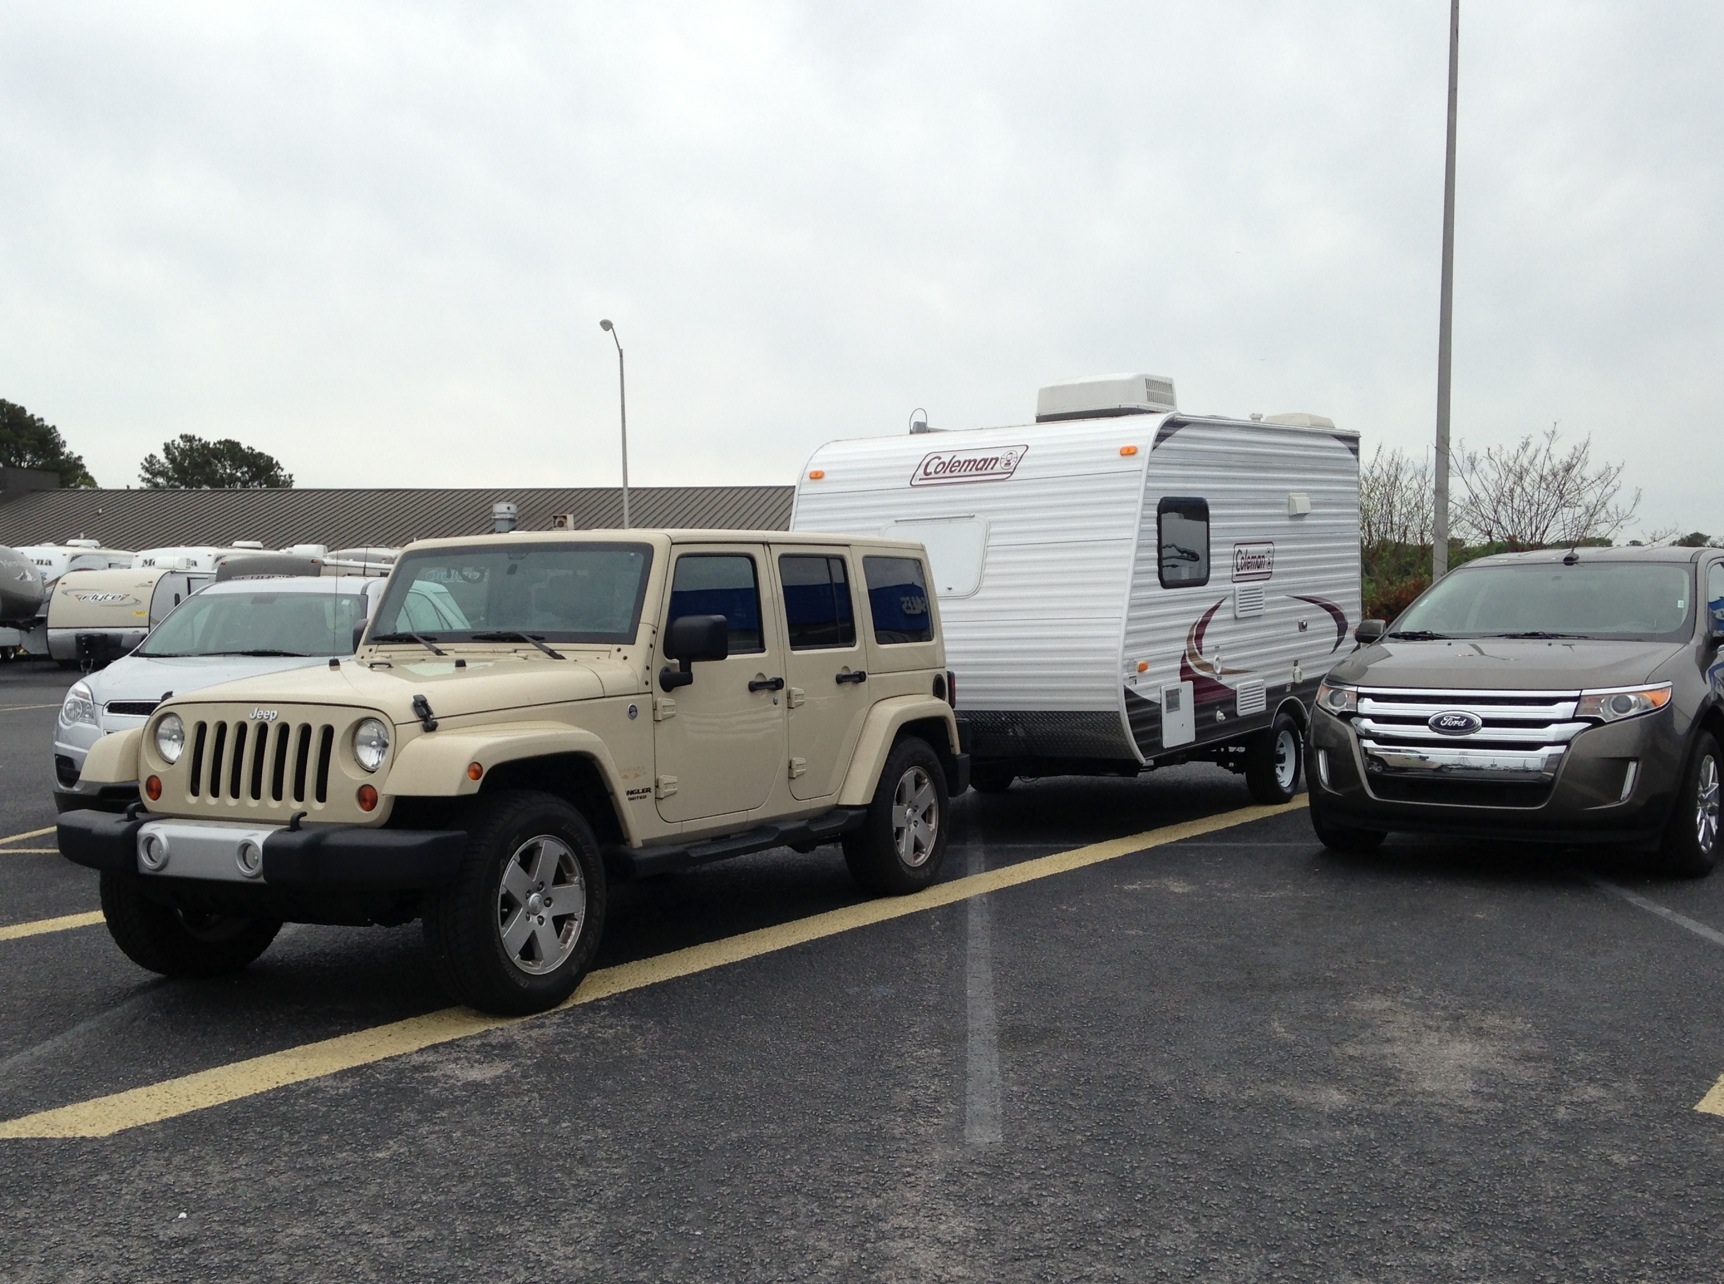 Newbies Towing a TT with a Jeep Wrangler Unlimited... (smallest,  comfortable, best) - Camping and RVing - - Page 2 - City-Data Forum